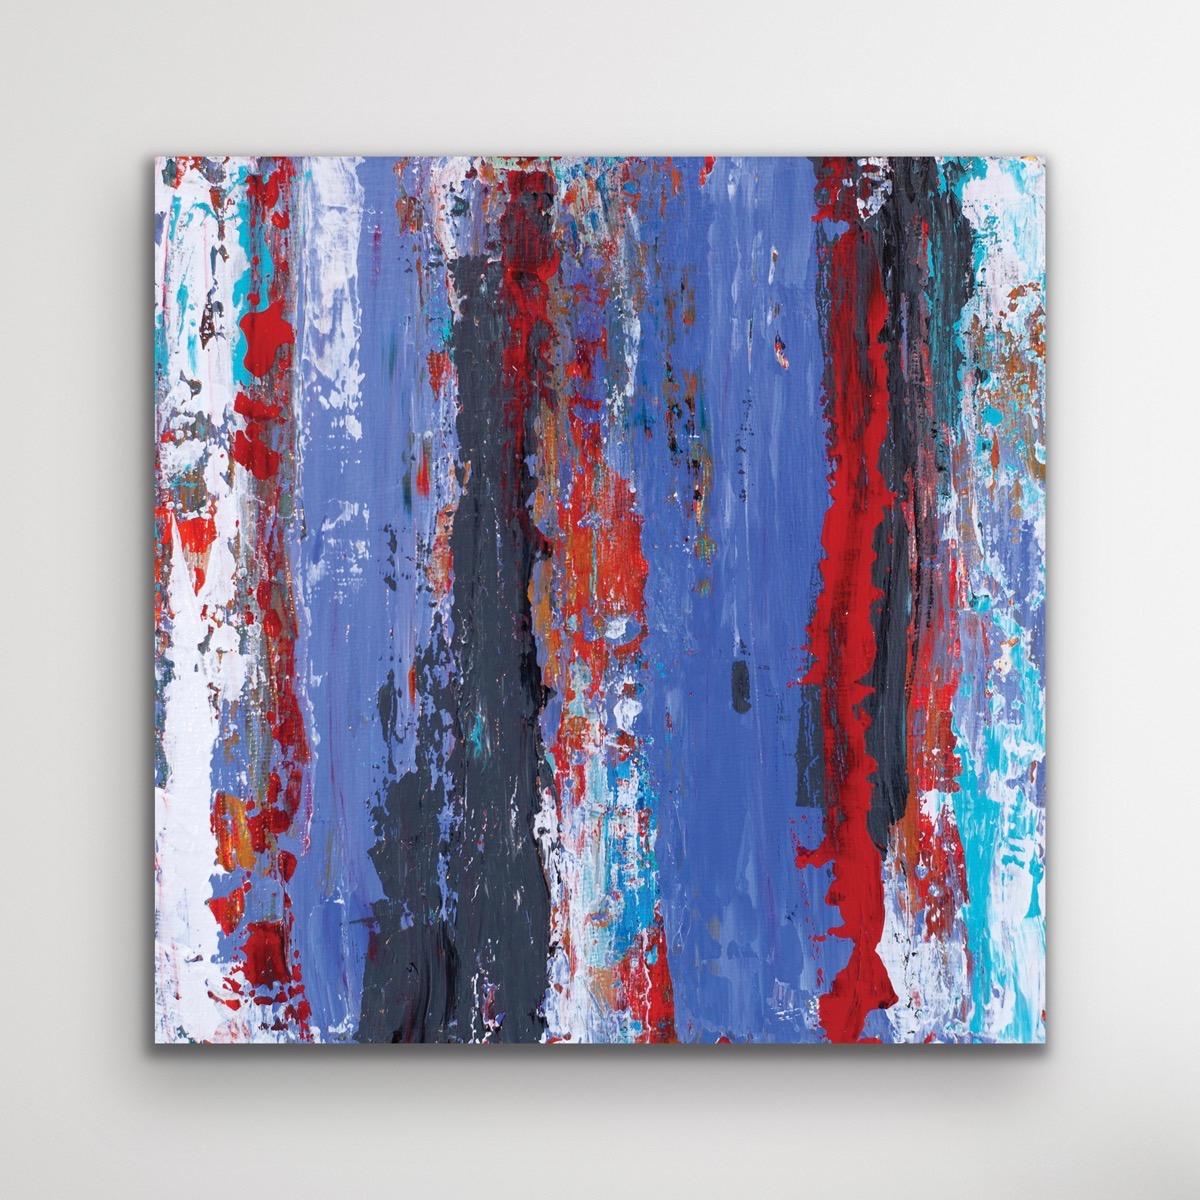 Abstract Contemporary Art, Knife Painting, Indoor Outdoor Decor, Print on Metal